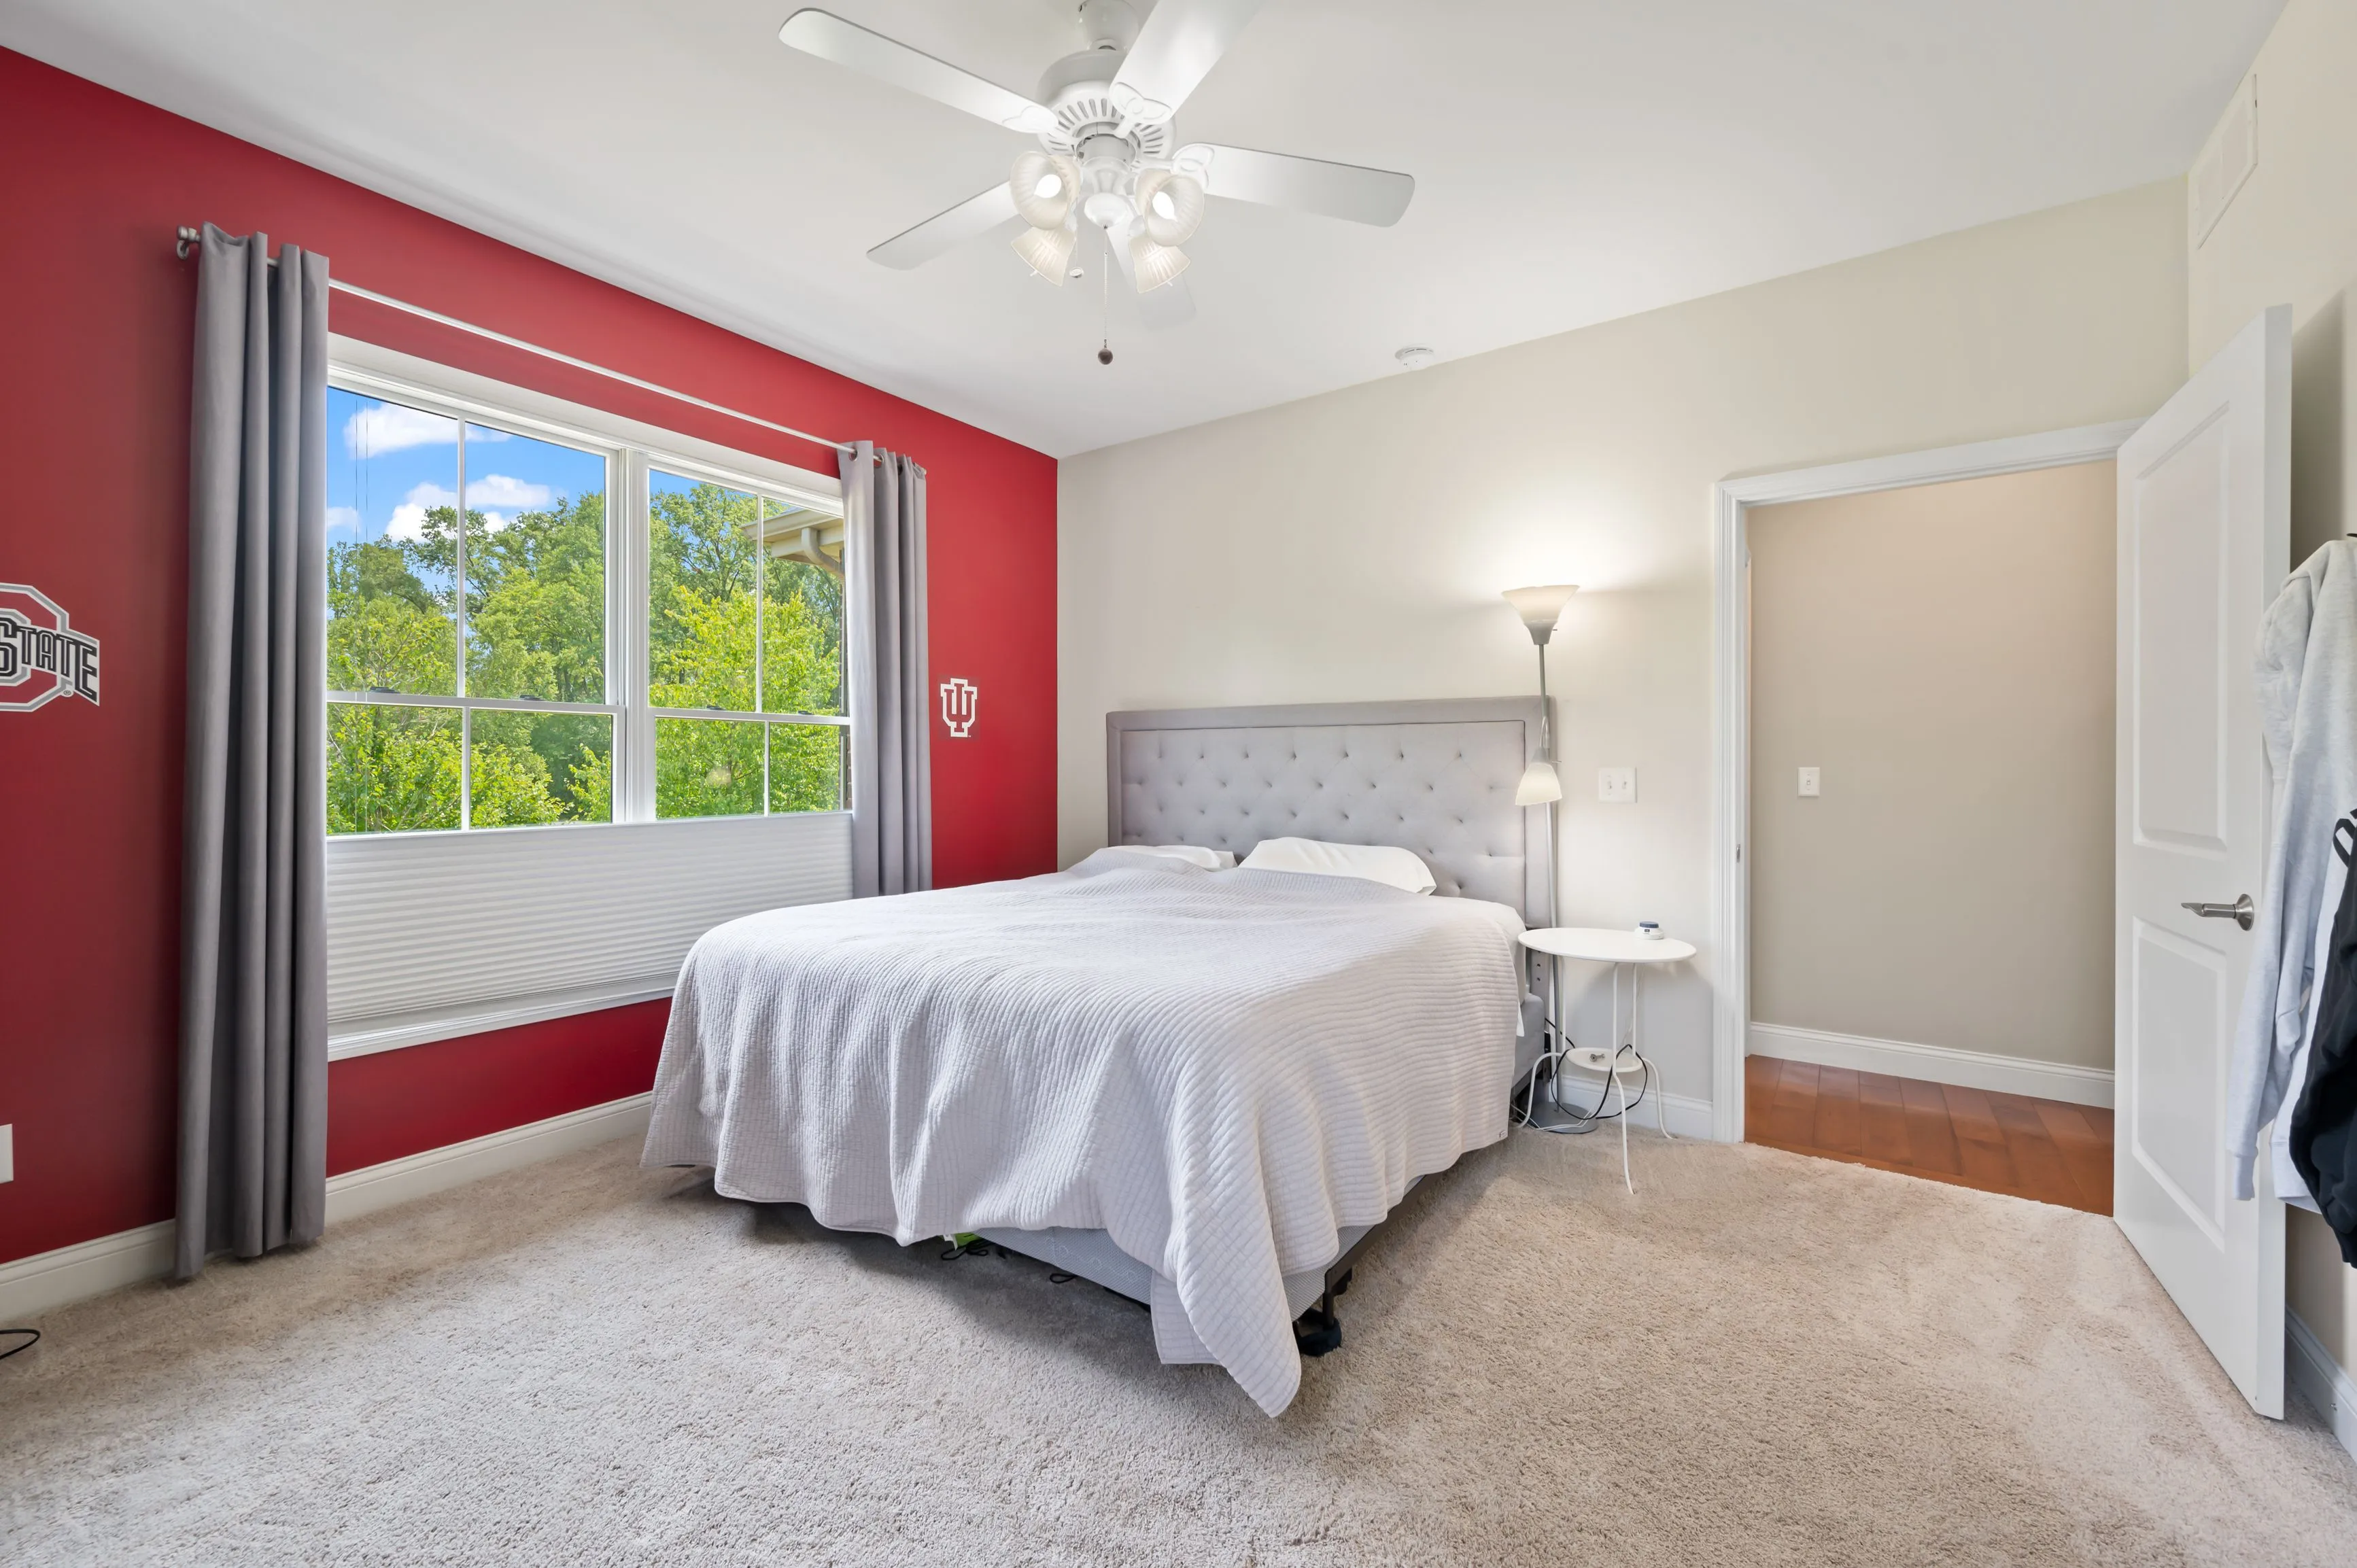 Bright bedroom with a large bed, red accent wall, window with a view of greenery, ceiling fan, and adjacent bathroom entrance.